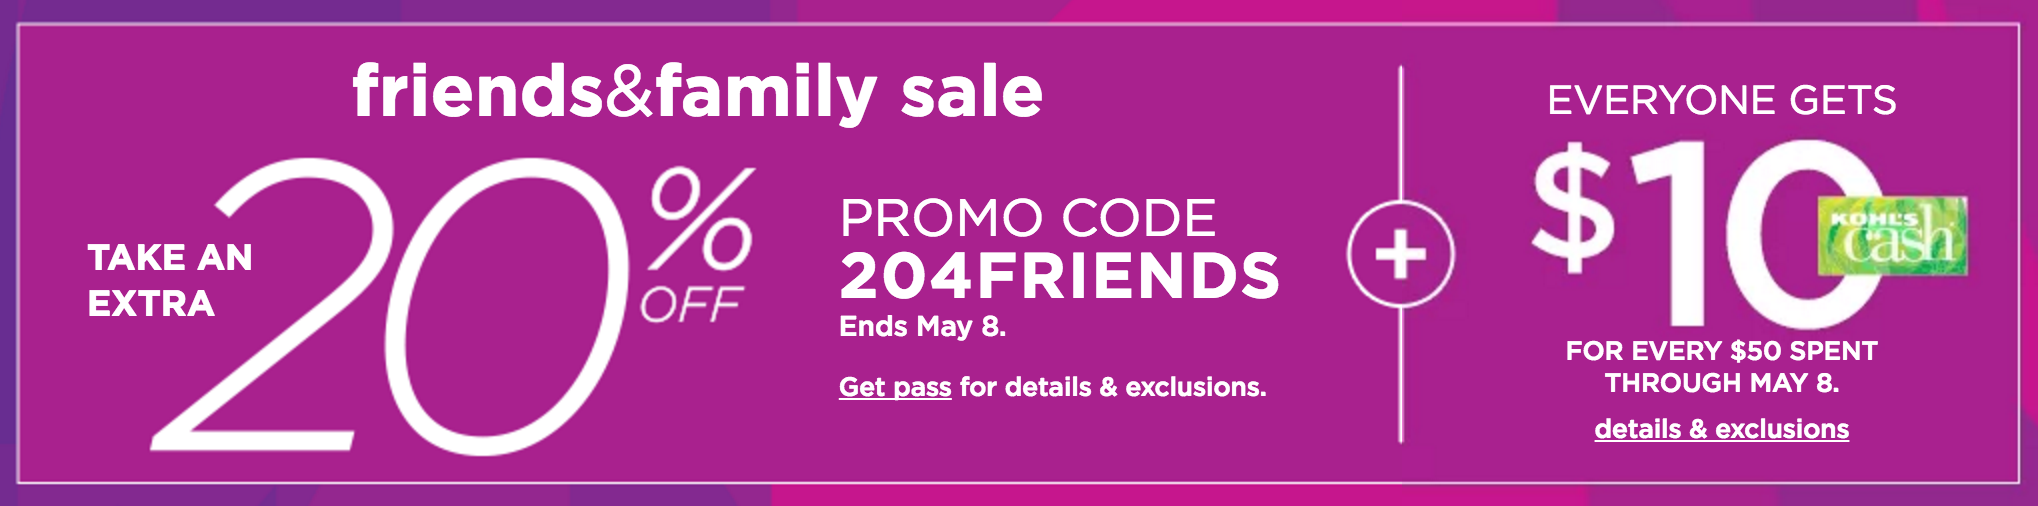 Save an Extra 20 During Kohl's Friends and Family Sale NerdWallet